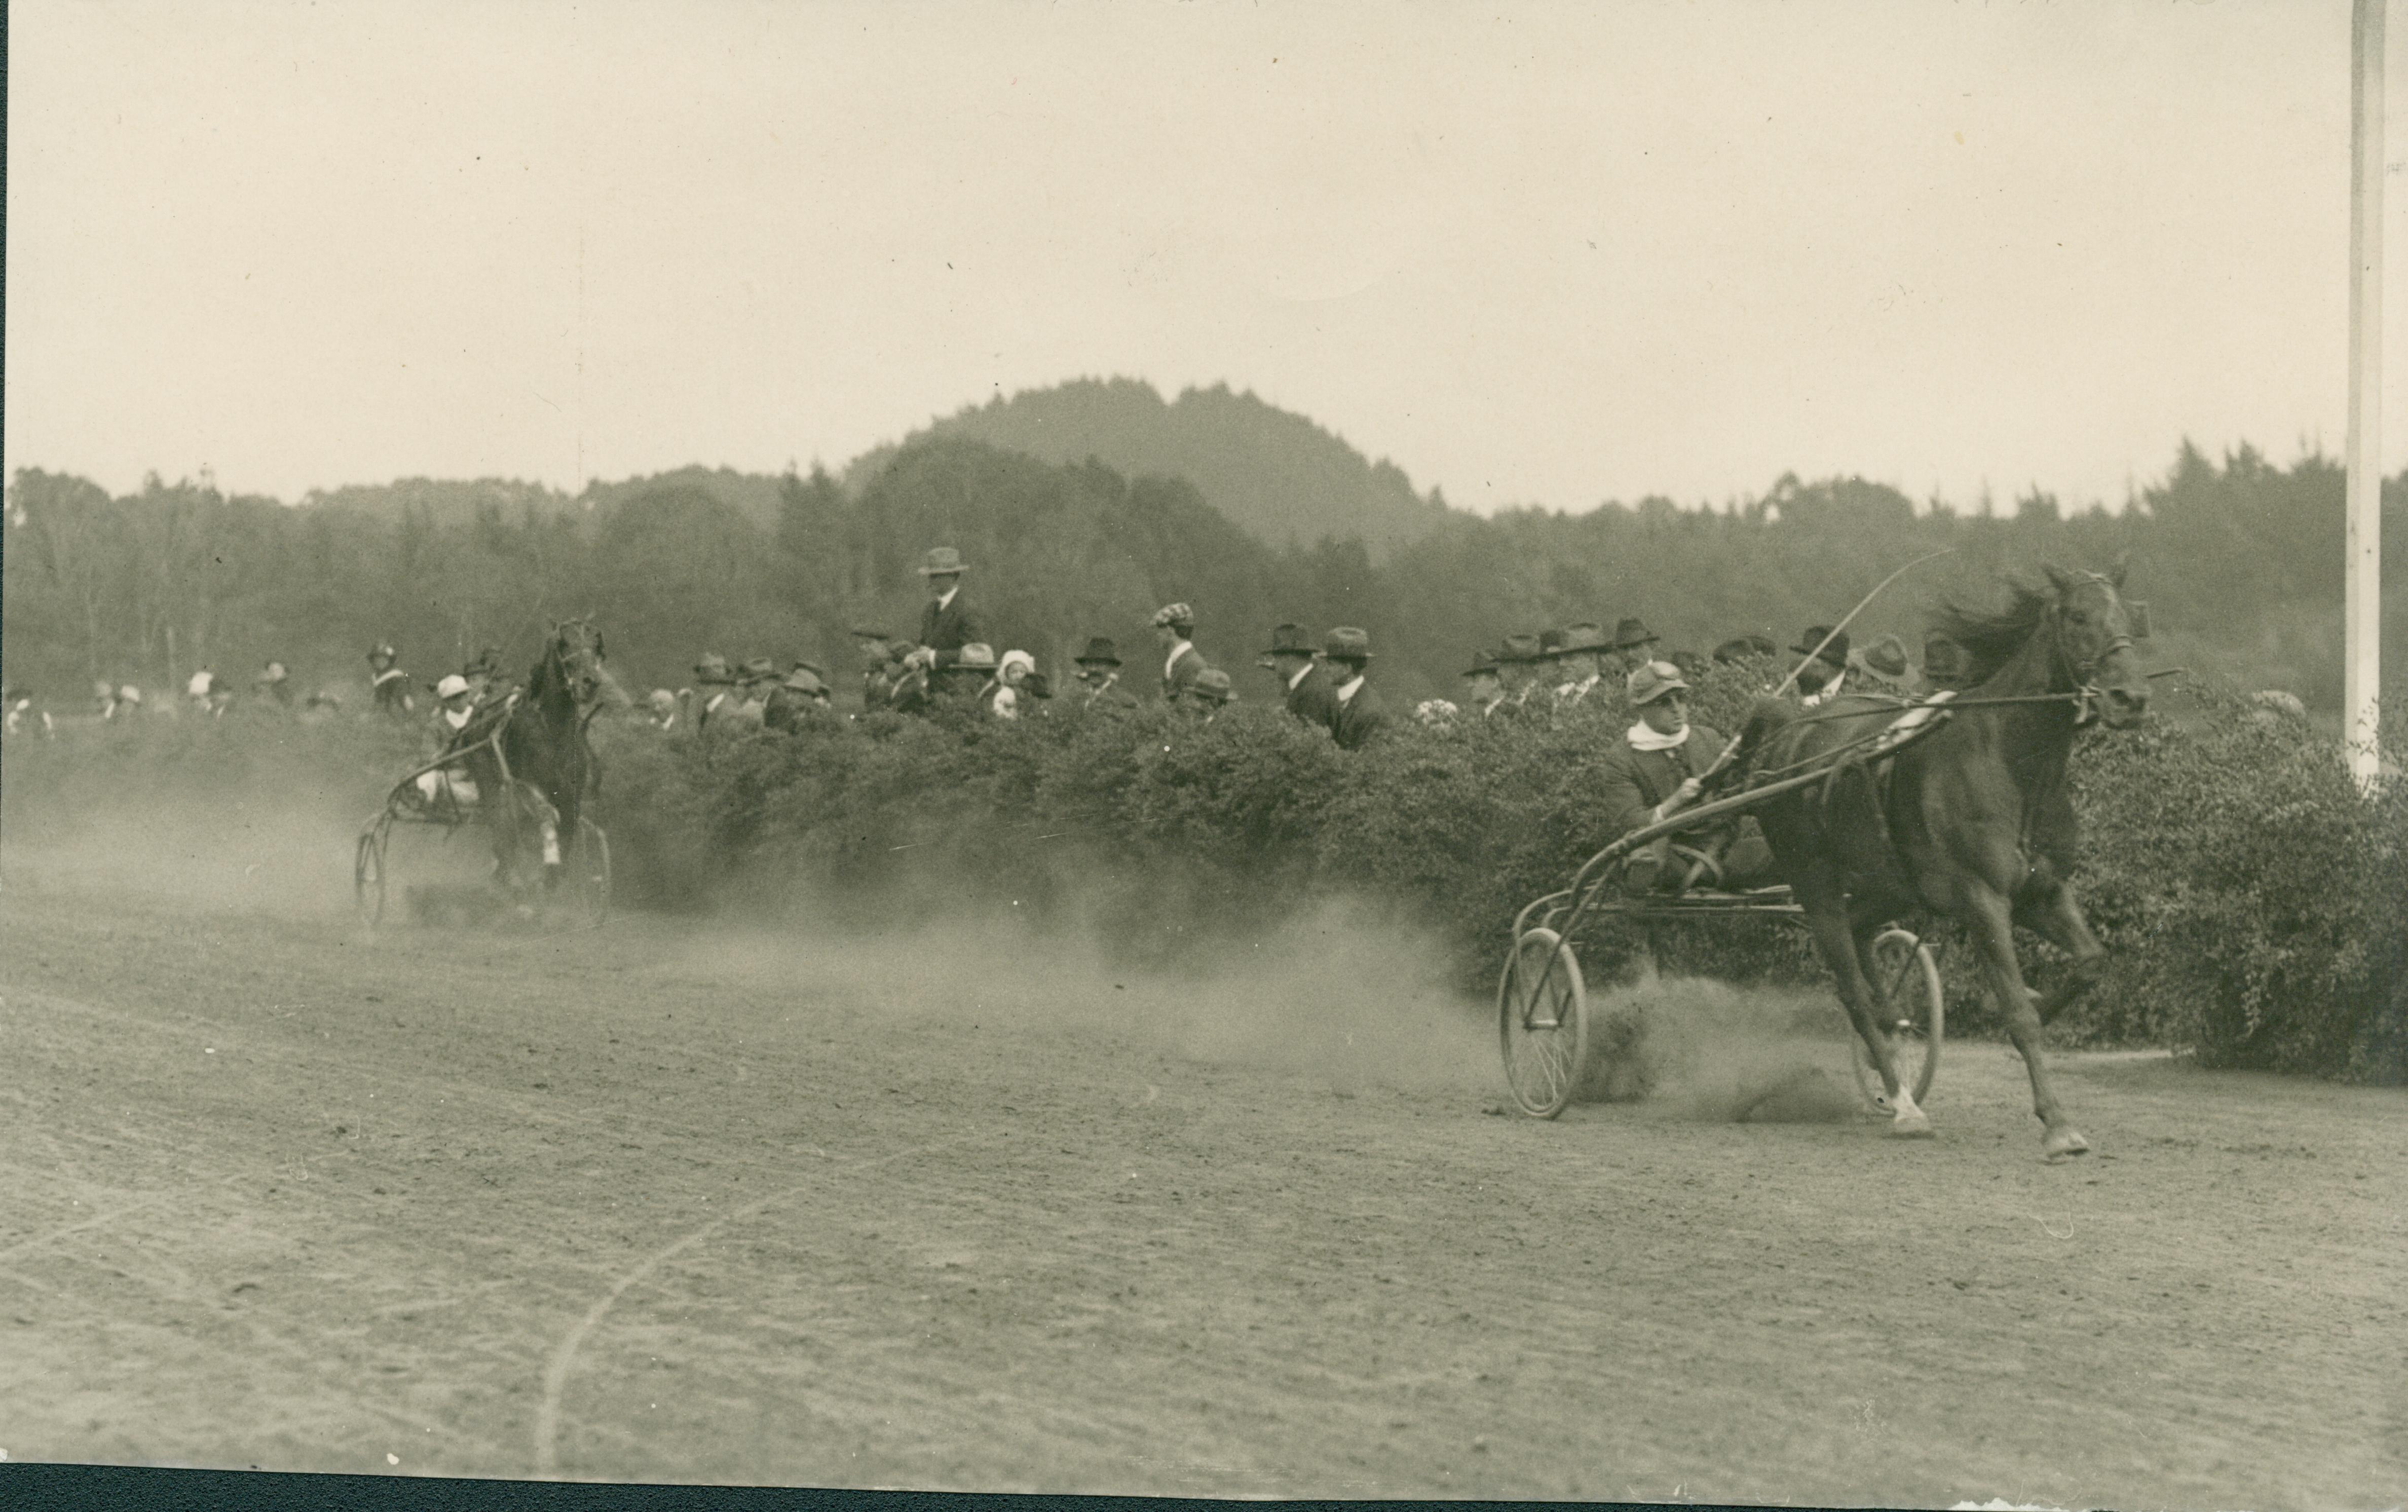 View of two contestants at Stadium Race Track, Golden Gate Park